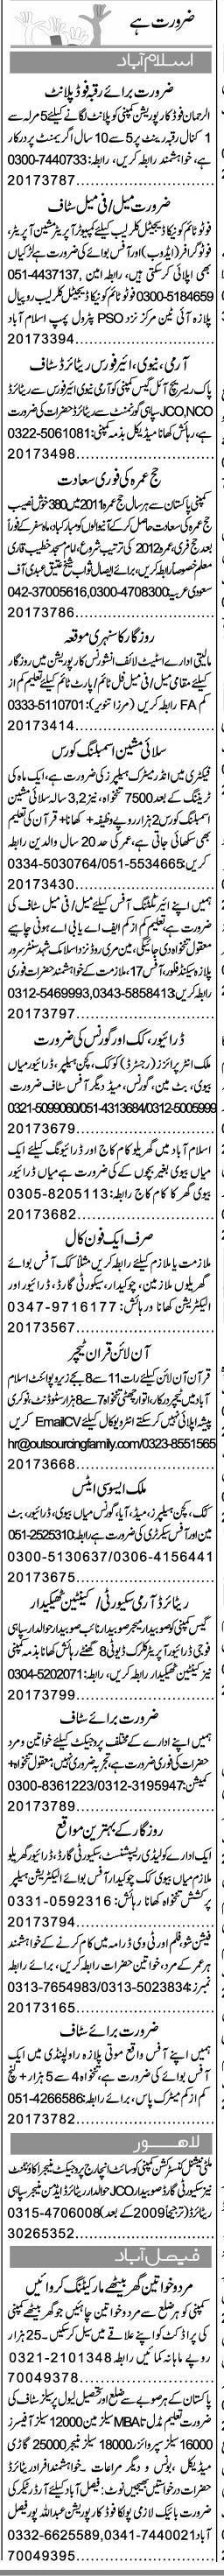 Misc. Jobs in Islamabad Express Classified